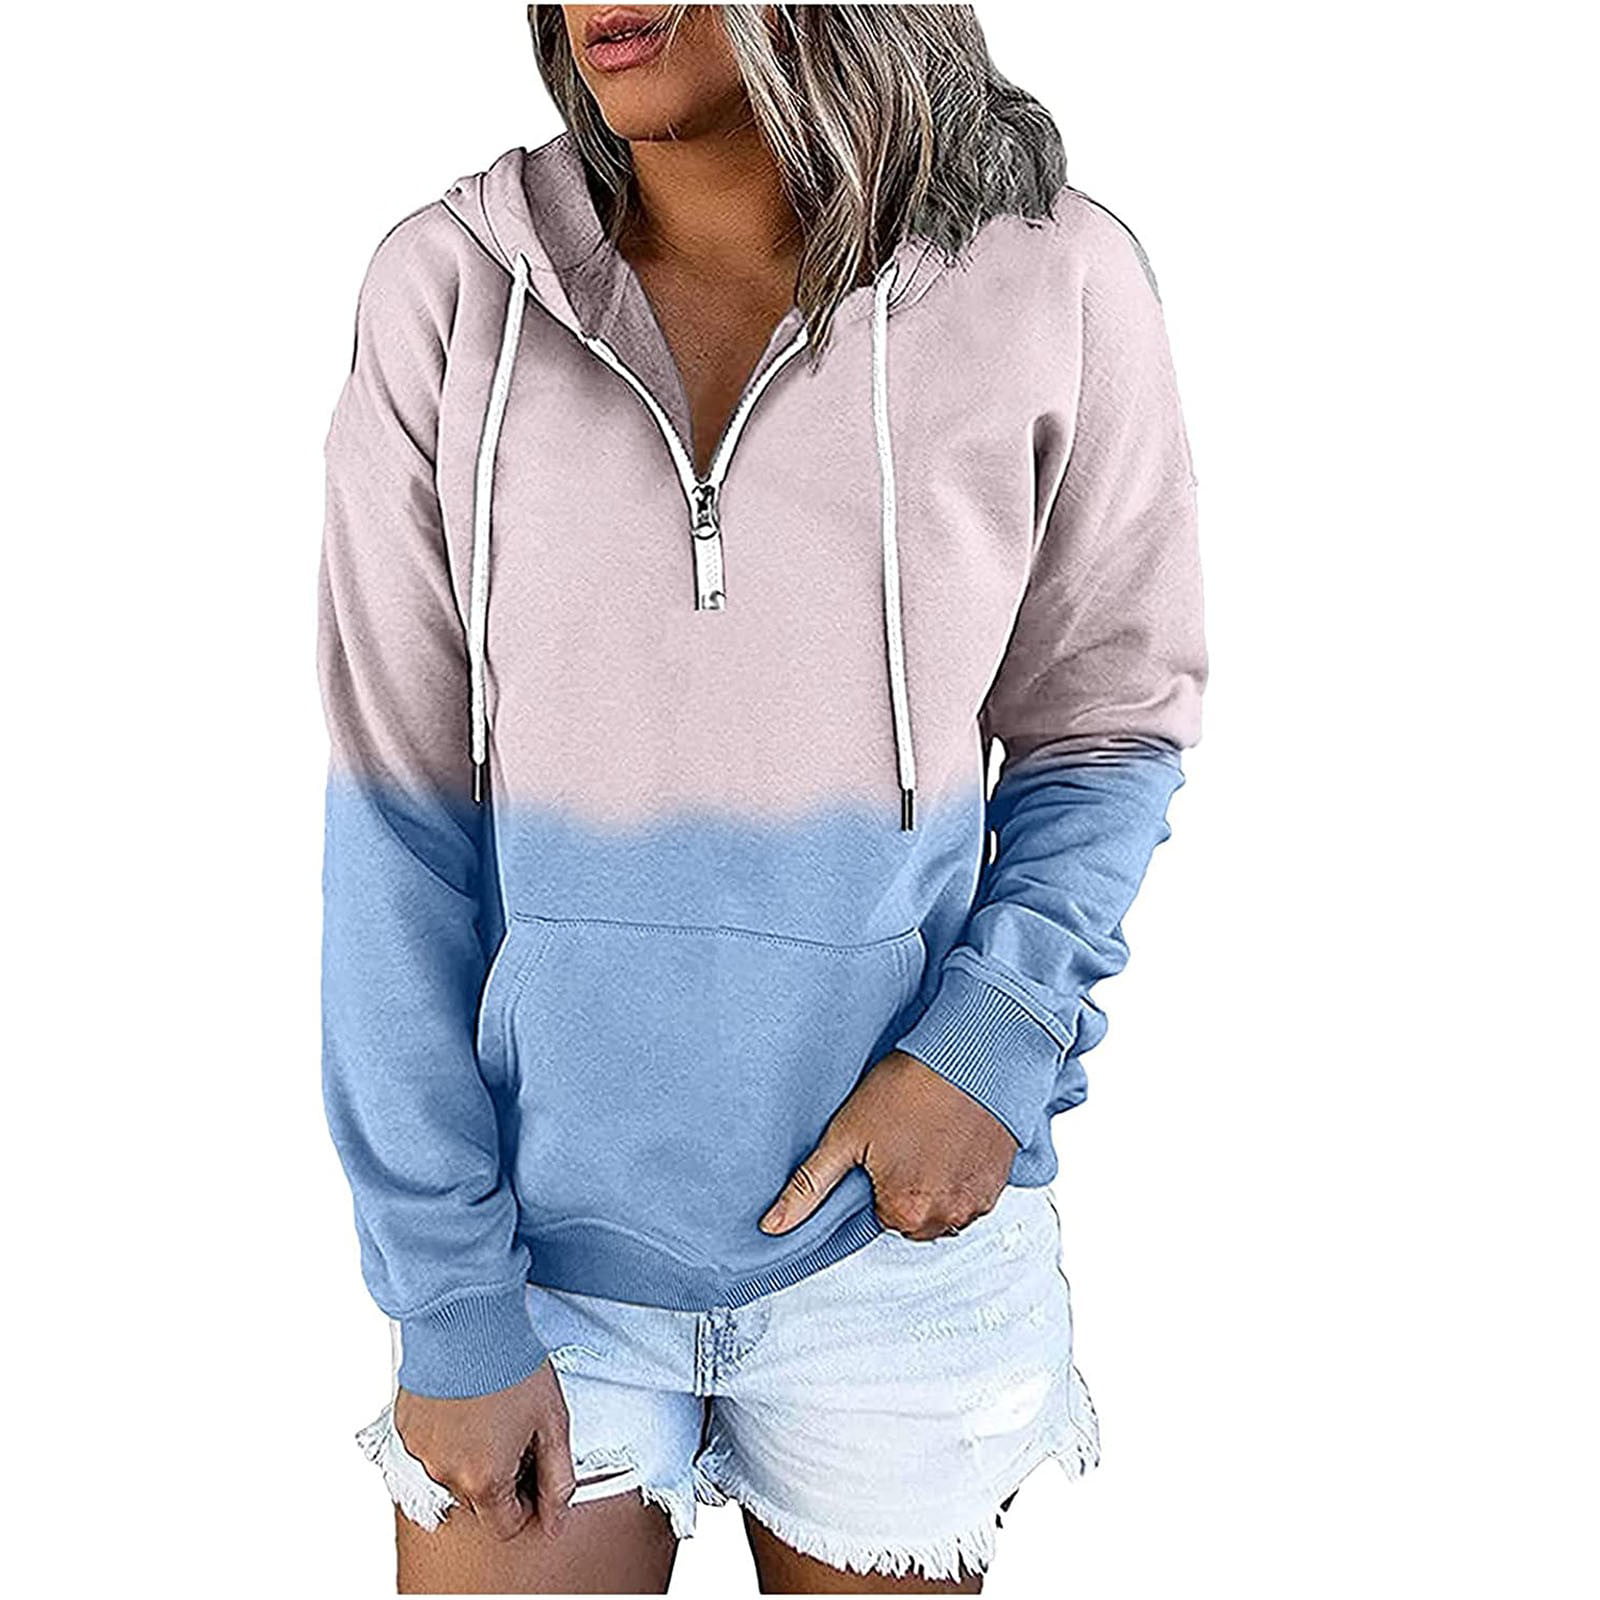 Christmas Gift For Family,Sweaters For Women LIDYCE Women's Hooded ...